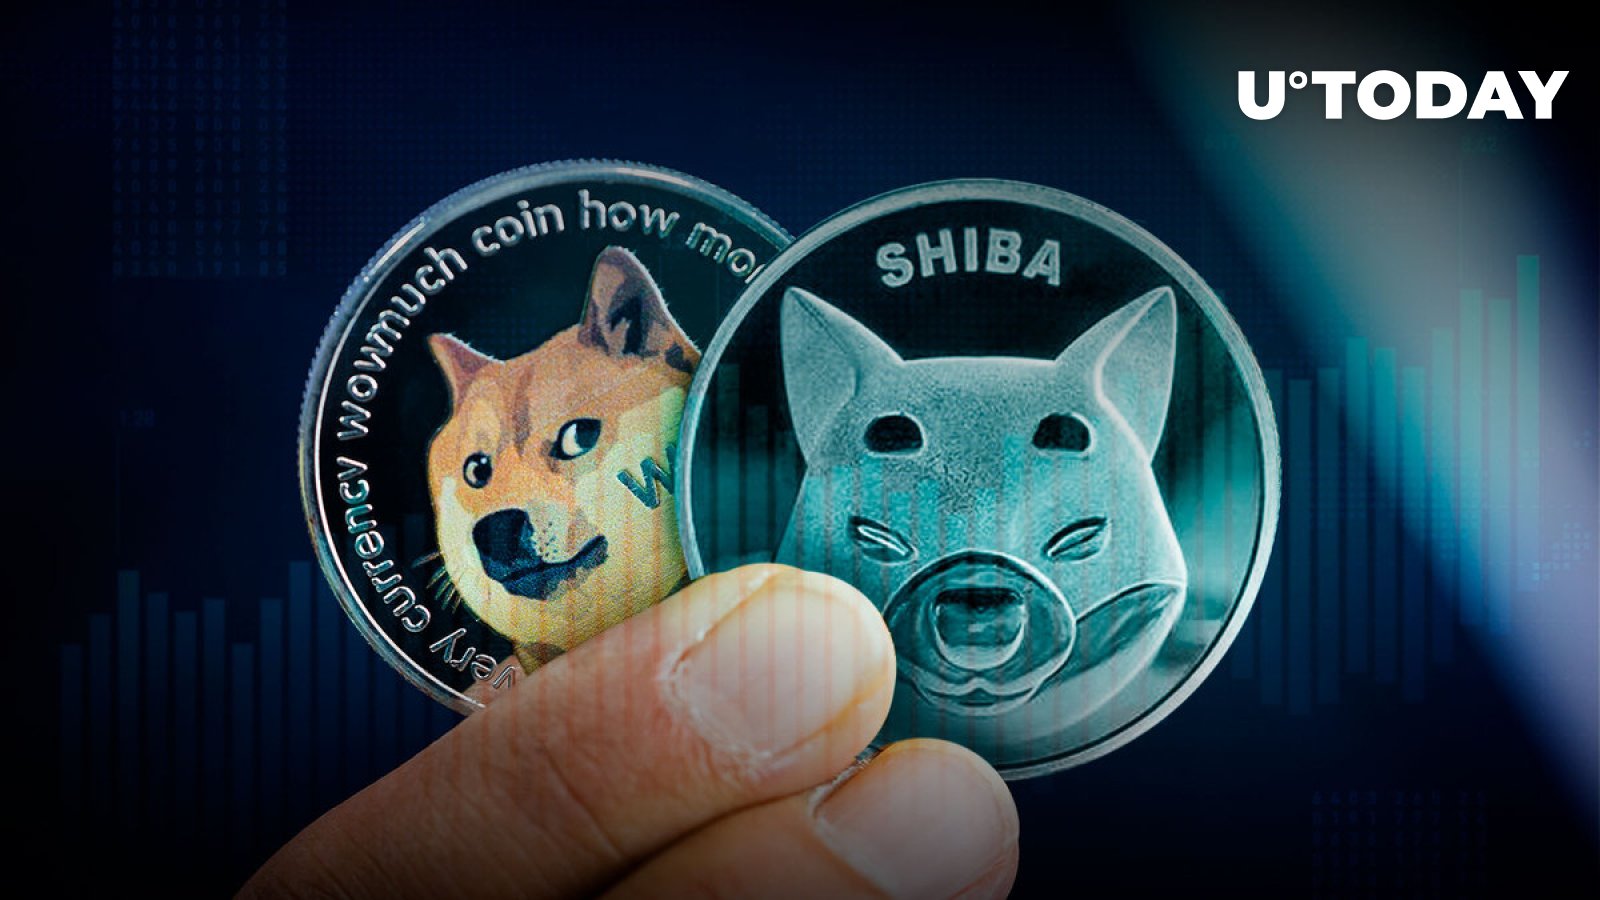 shiba-inu-dogecoin-post-gains-as-meme-cryptocurrencies-trading-volumes-spike-151